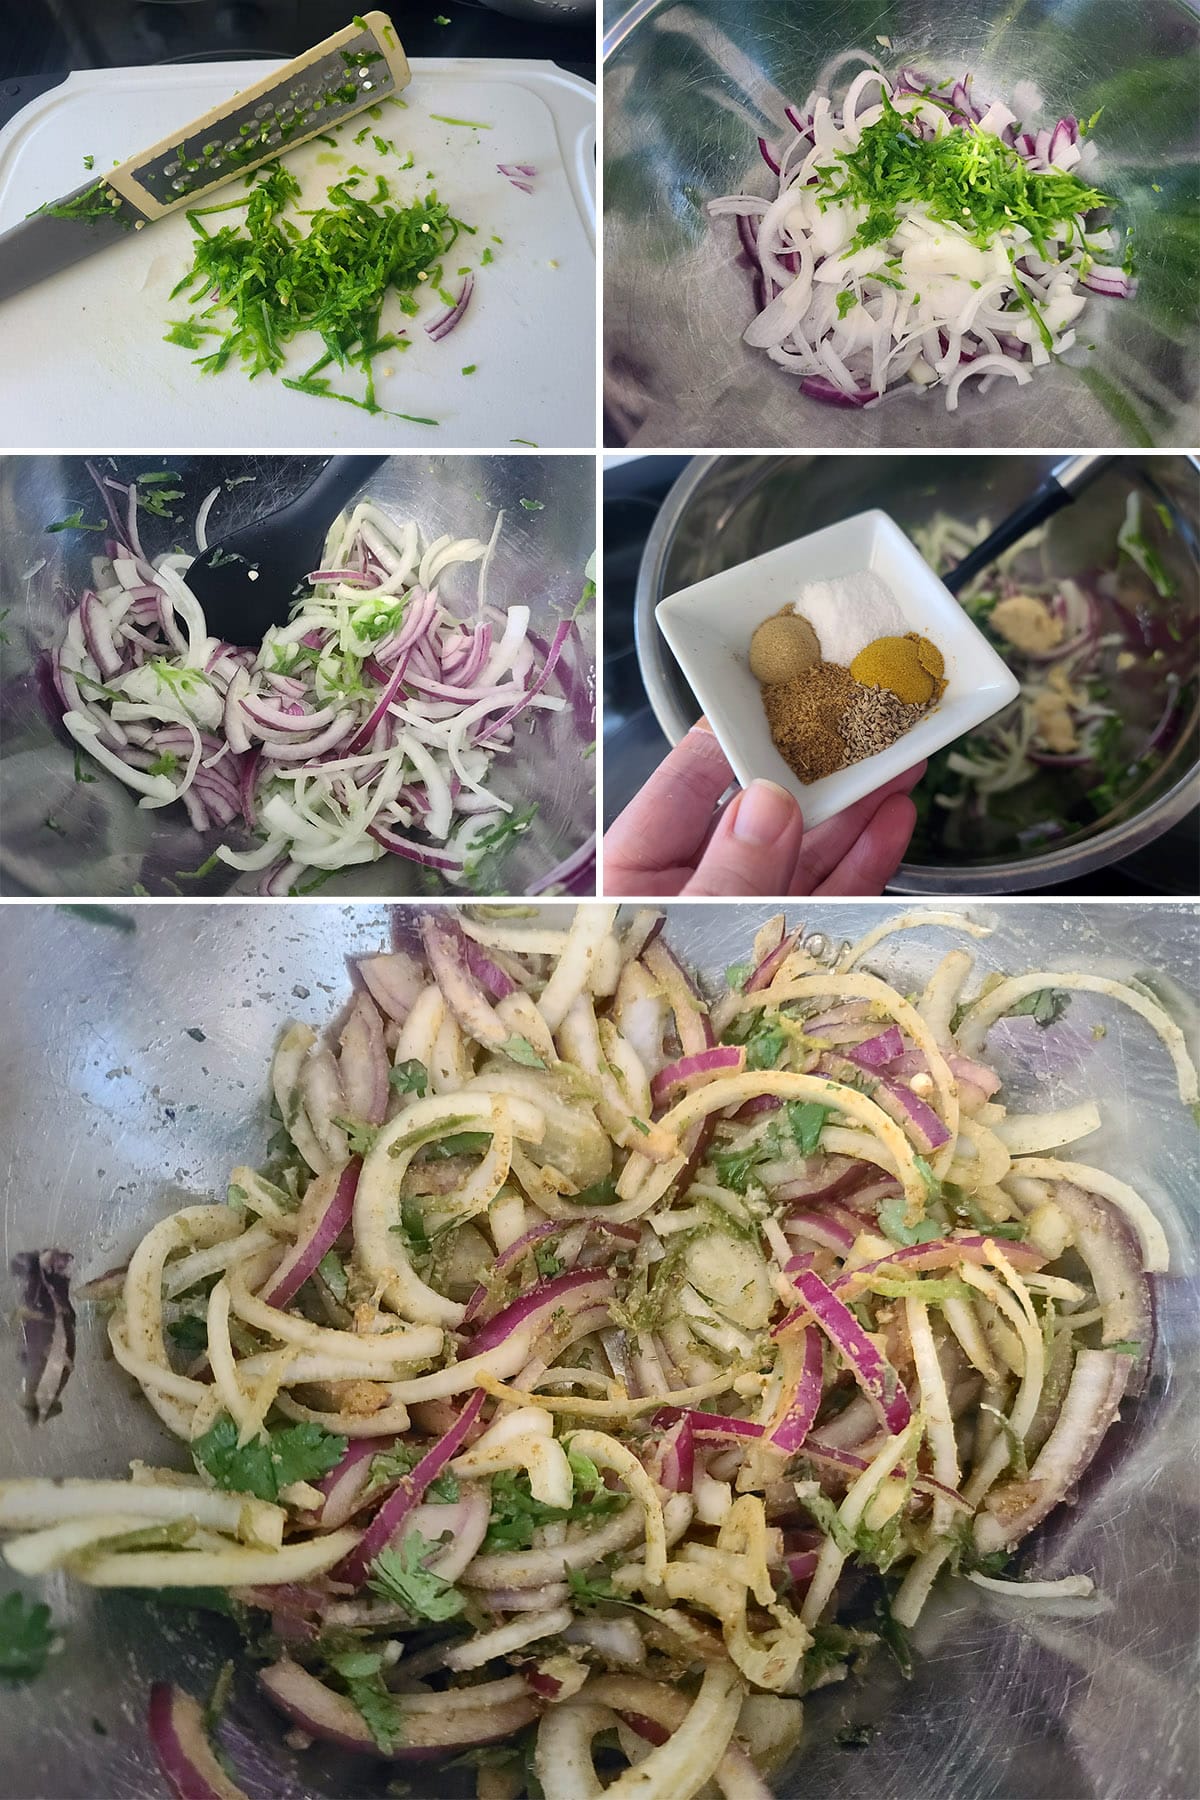 A 5 part image showing the other pakoda ingredients being mixed with the onion slices.